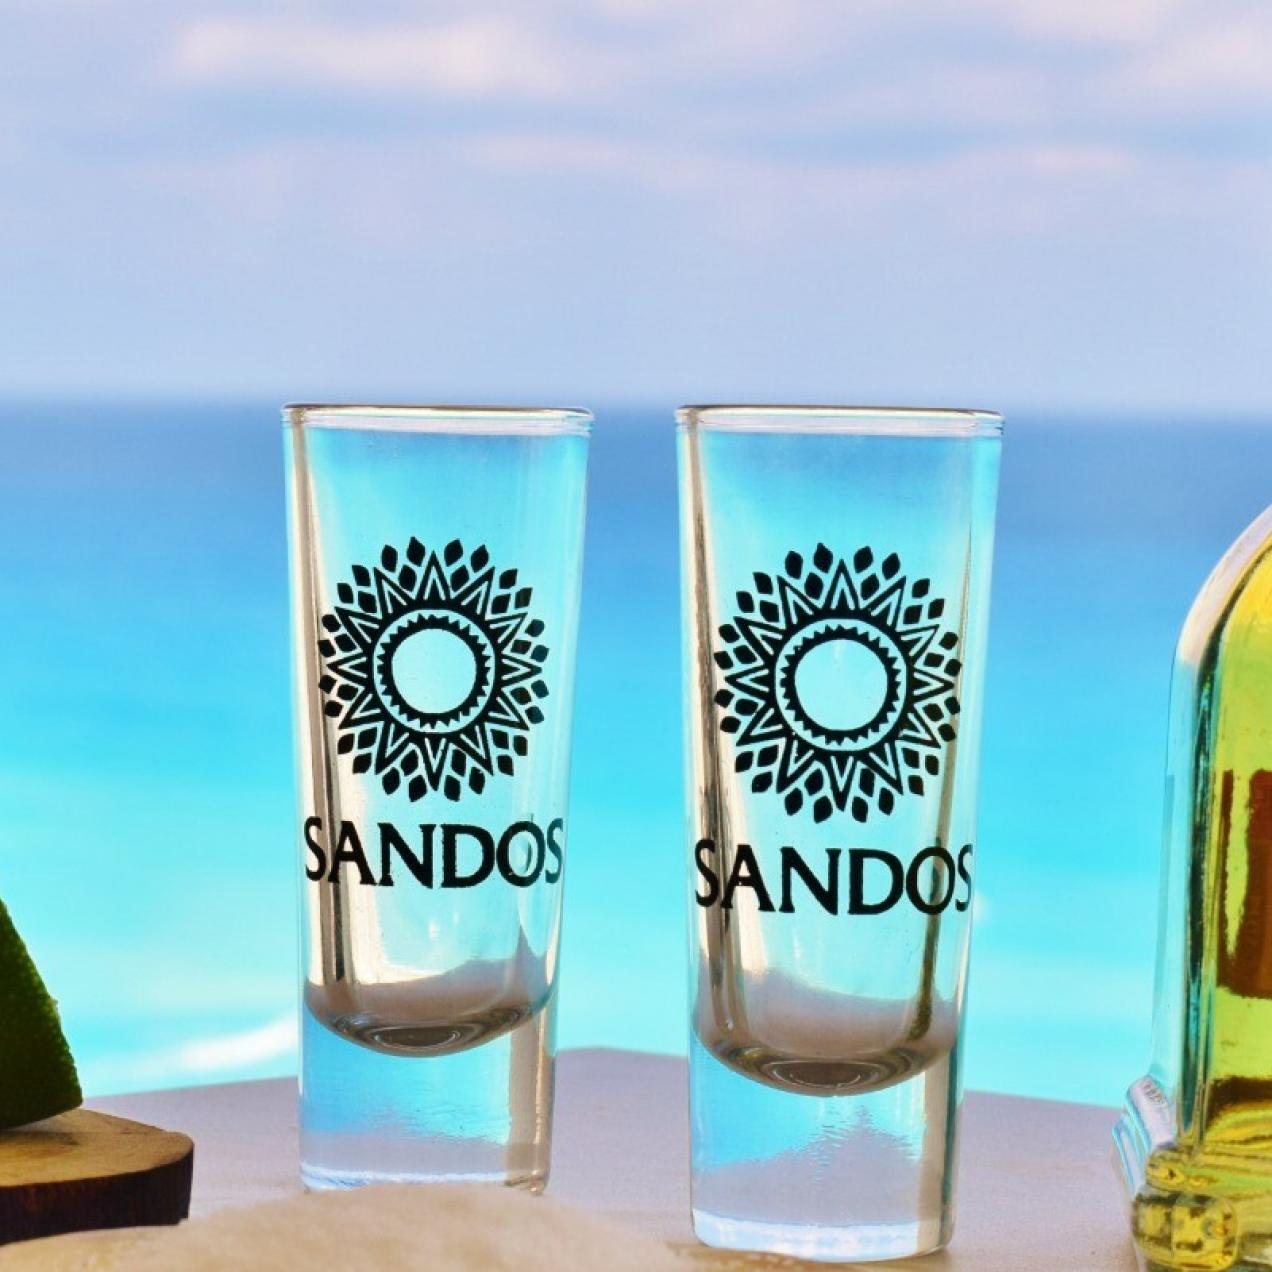 Sign Up for Our Sandos Loyalty Program in Two Easy Steps… Free!